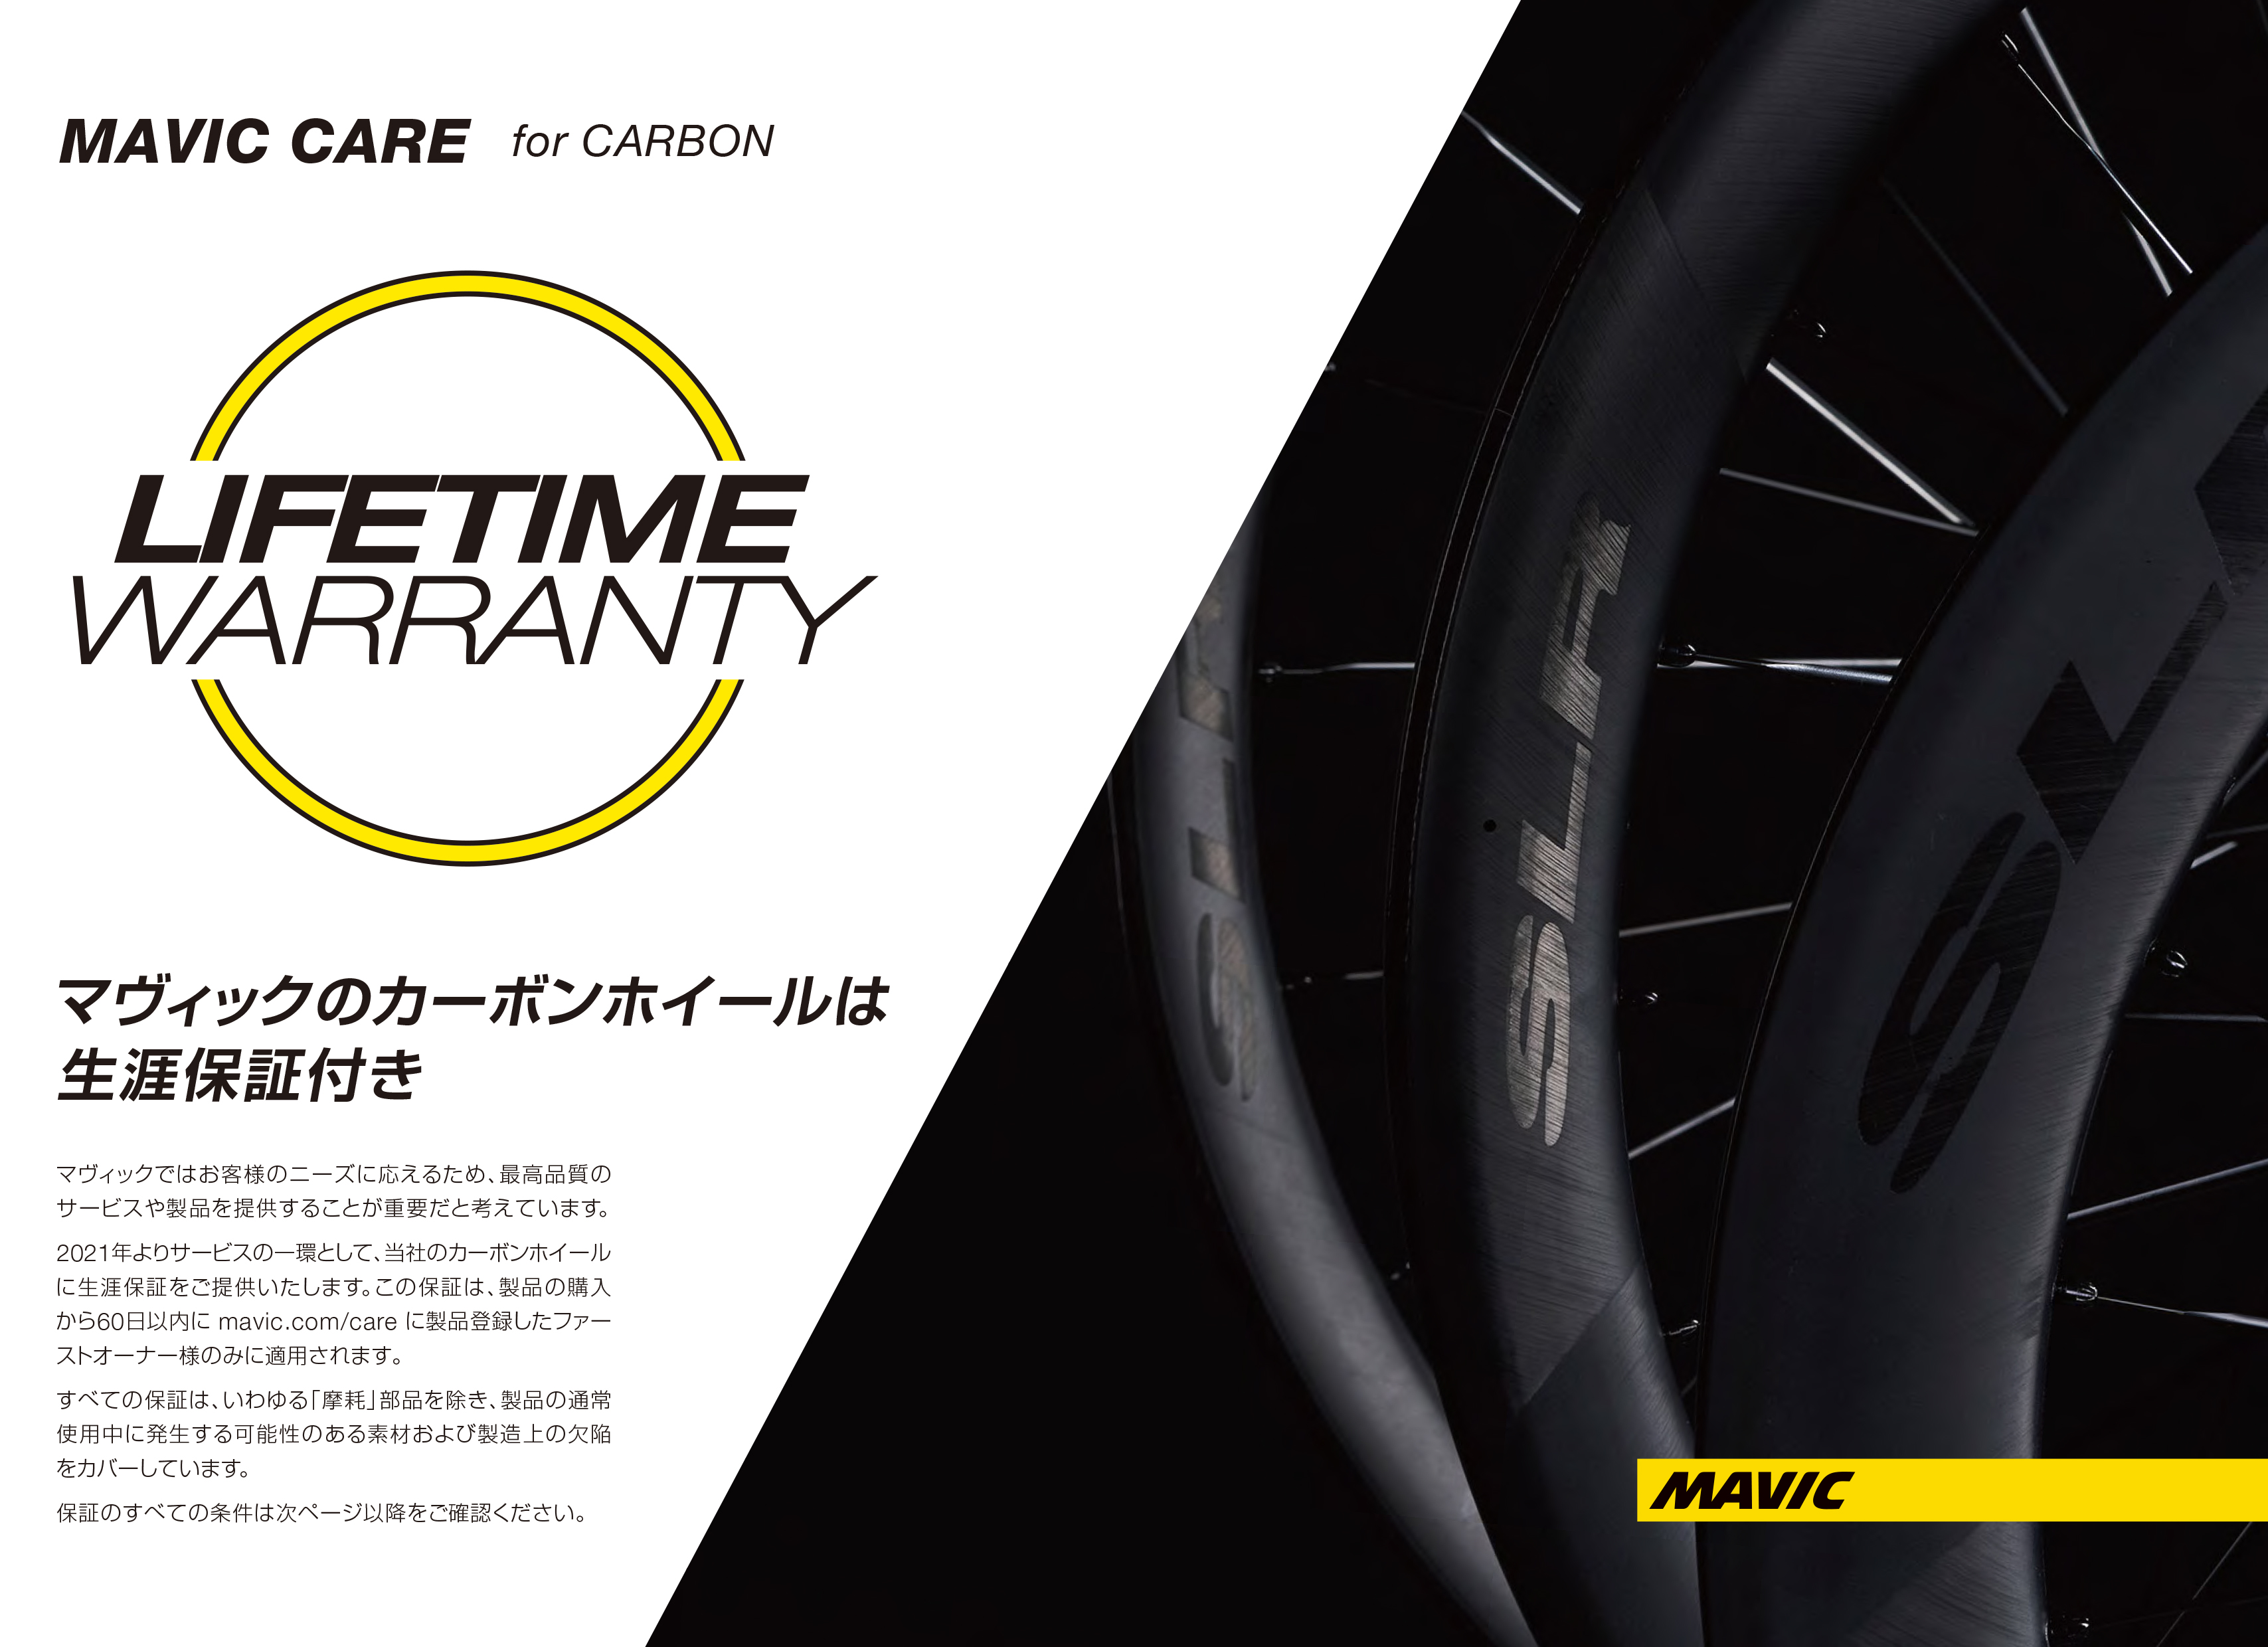 MAVIC CARE FOR CARBON マビック 保証 説明1